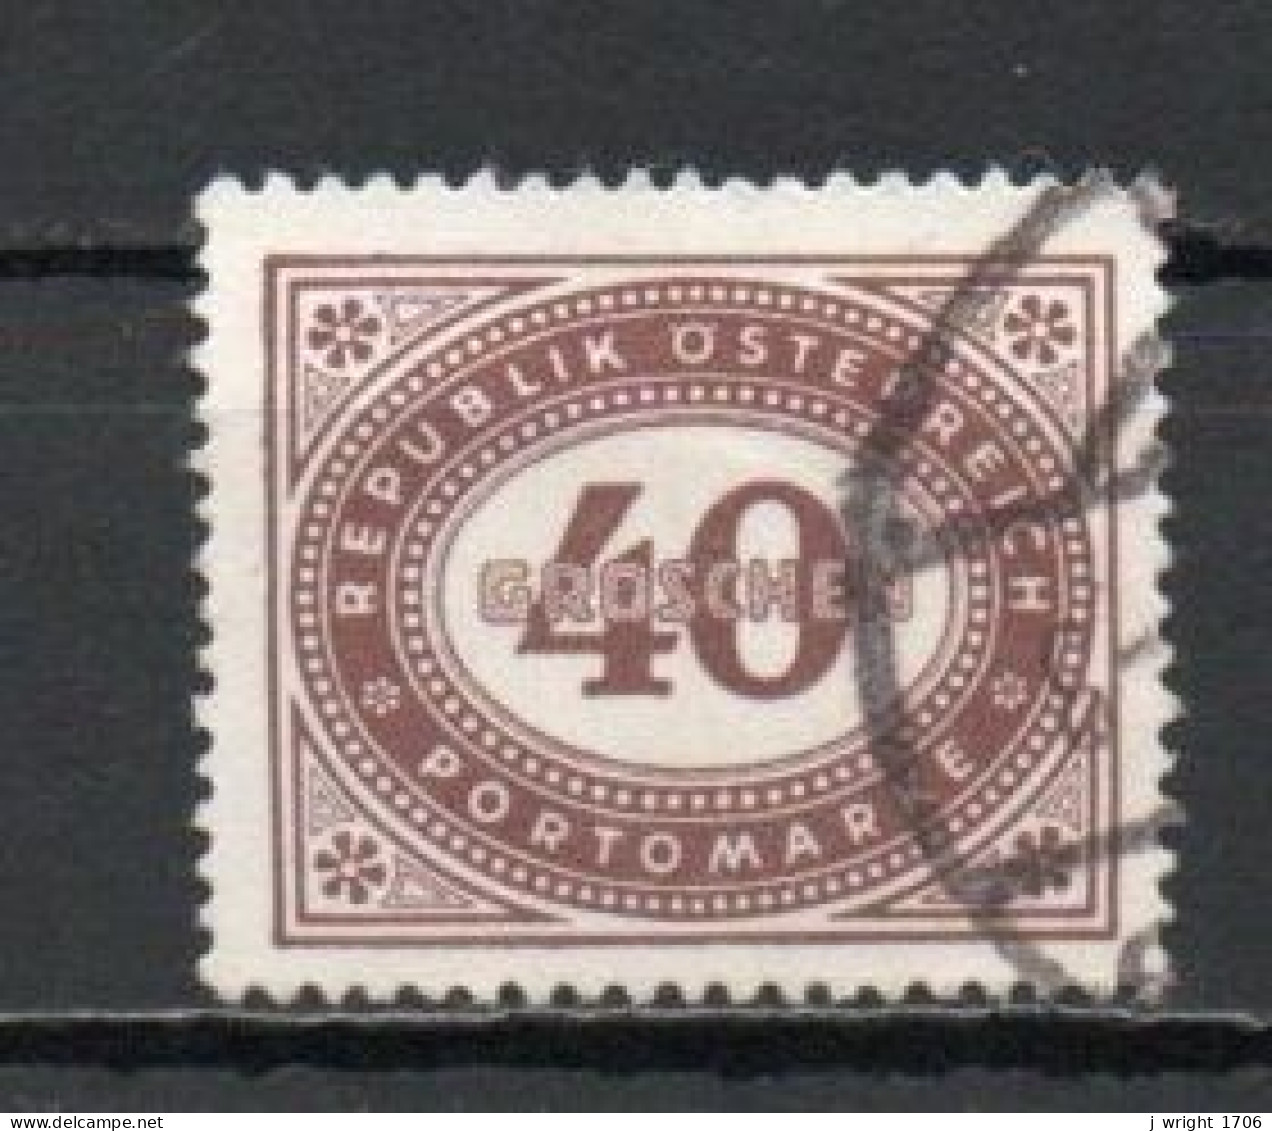 Austria, 1947, Numeral In Oval Frame, 40g, USED - Postage Due